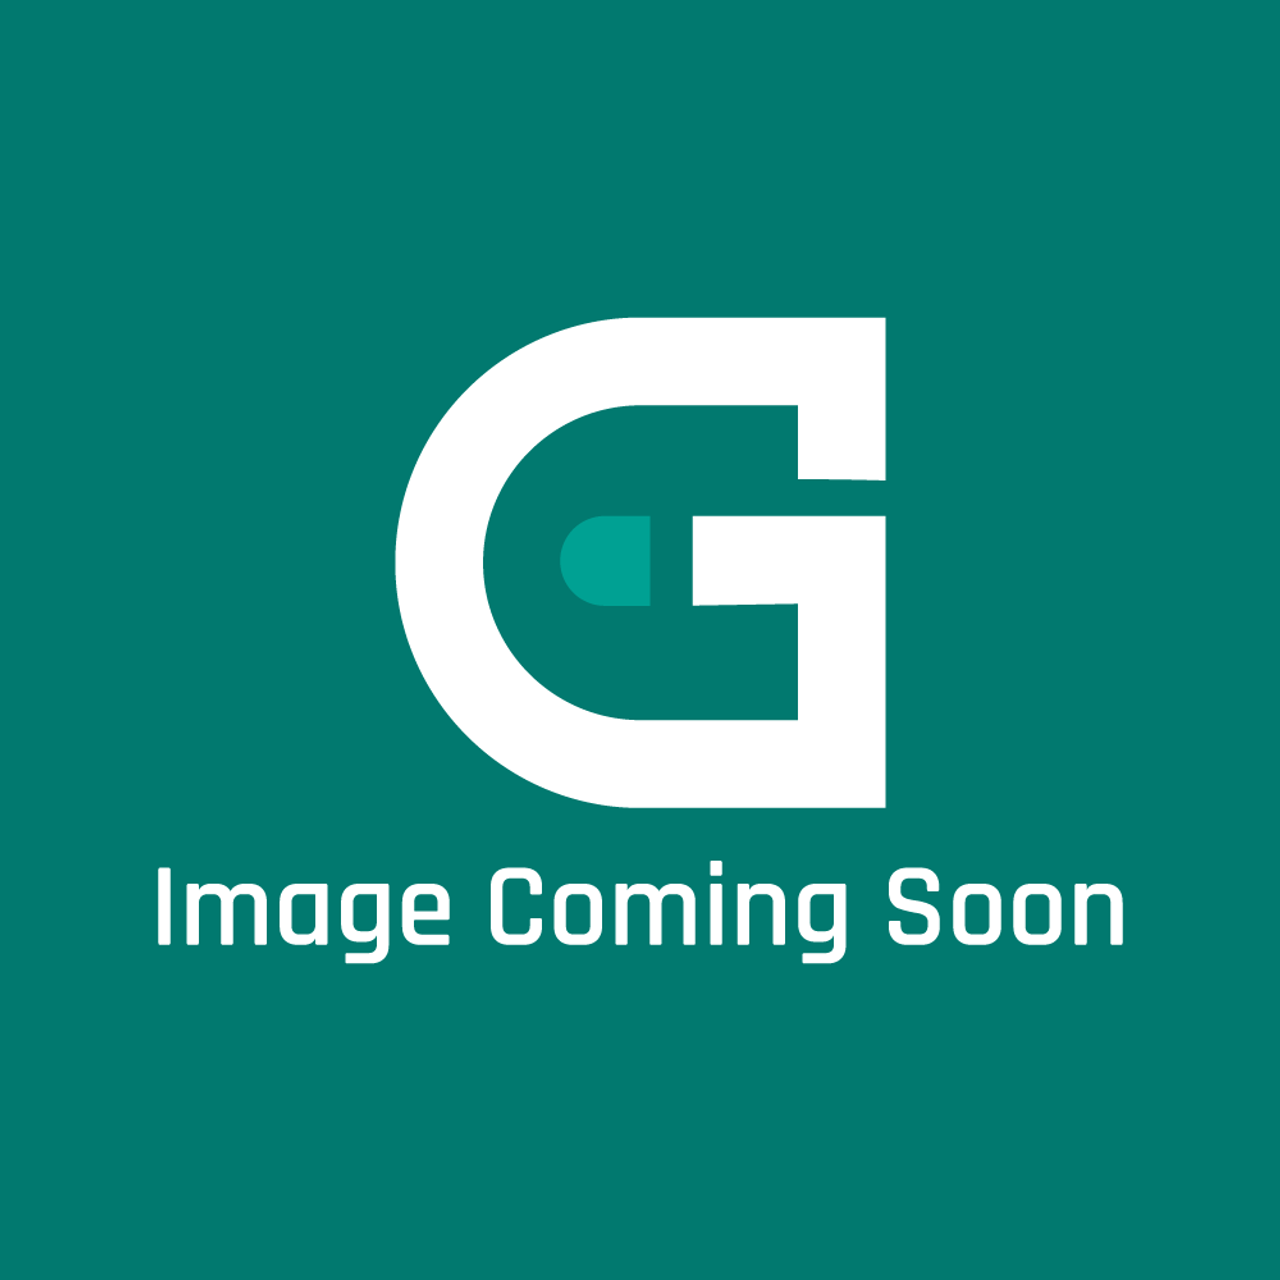 Frigidaire - Electrolux 316605340 Panel - Image Coming Soon!